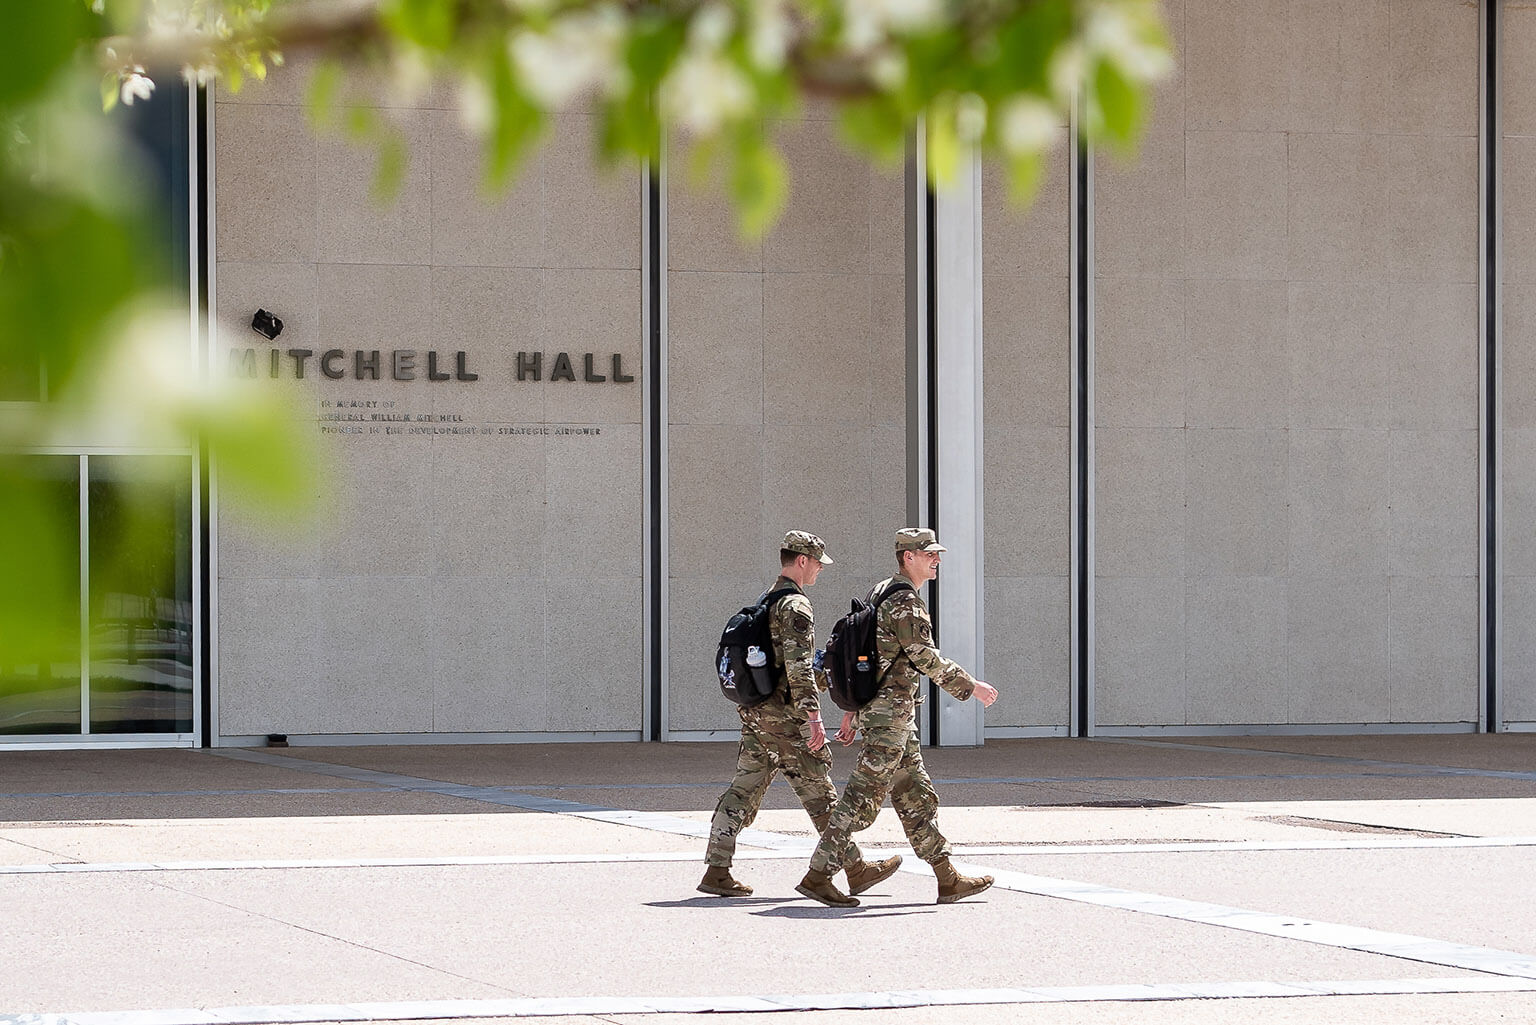 Cadets walking past Mitchell Hall